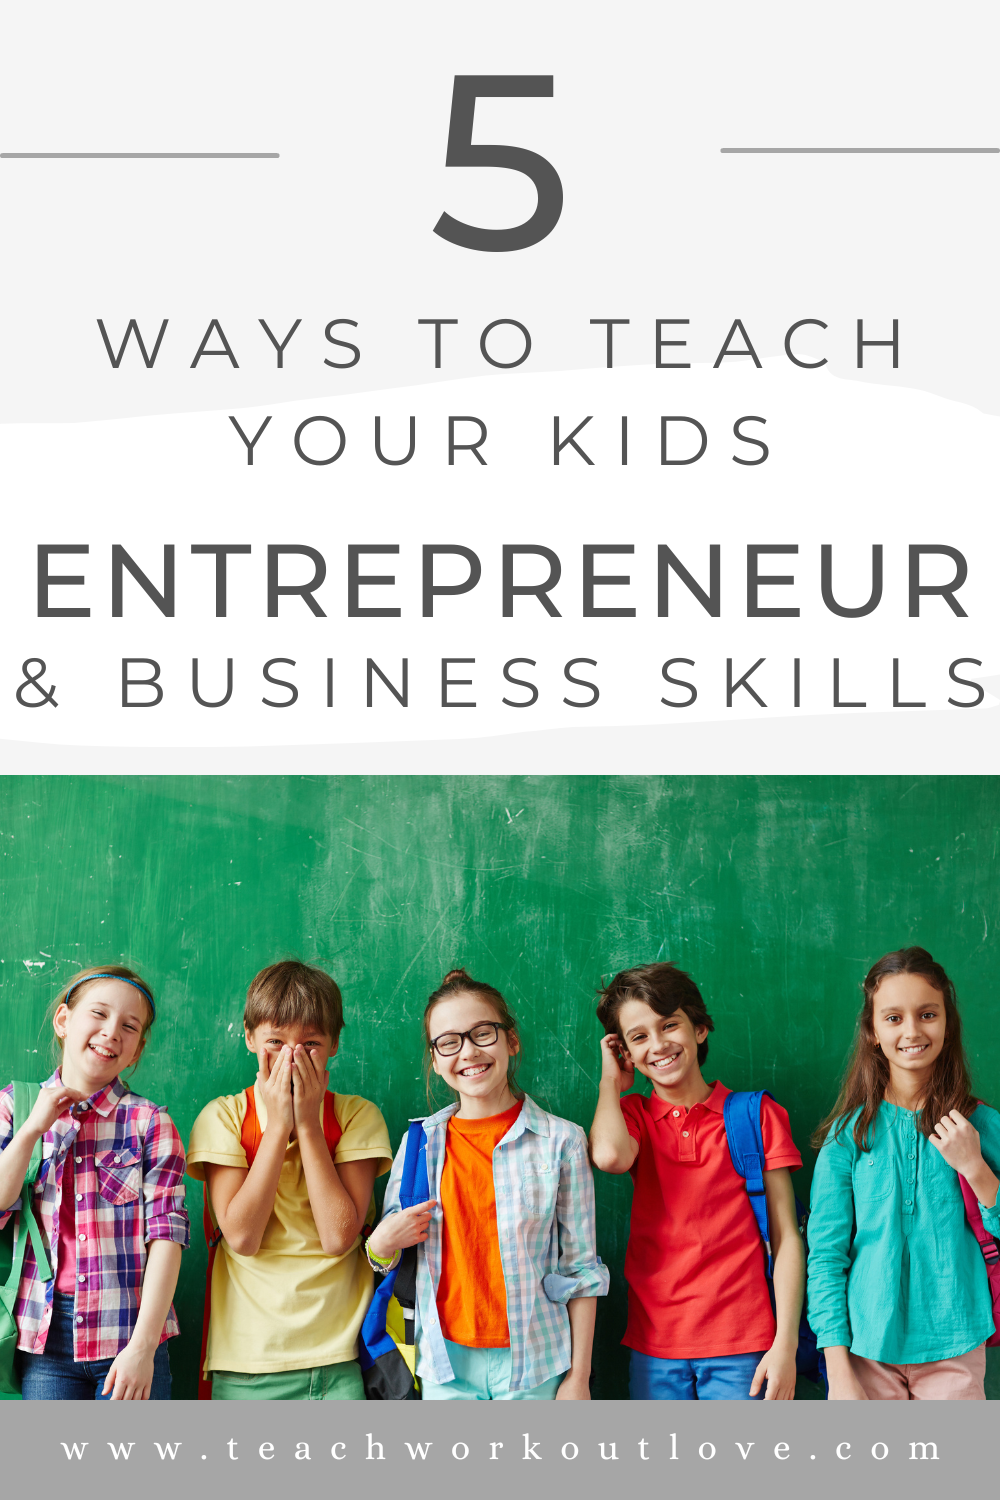 In this article, we take a look at how you can teach your kids entrepreneurial and business skills that will be useful no matter what career they pursue as adults.